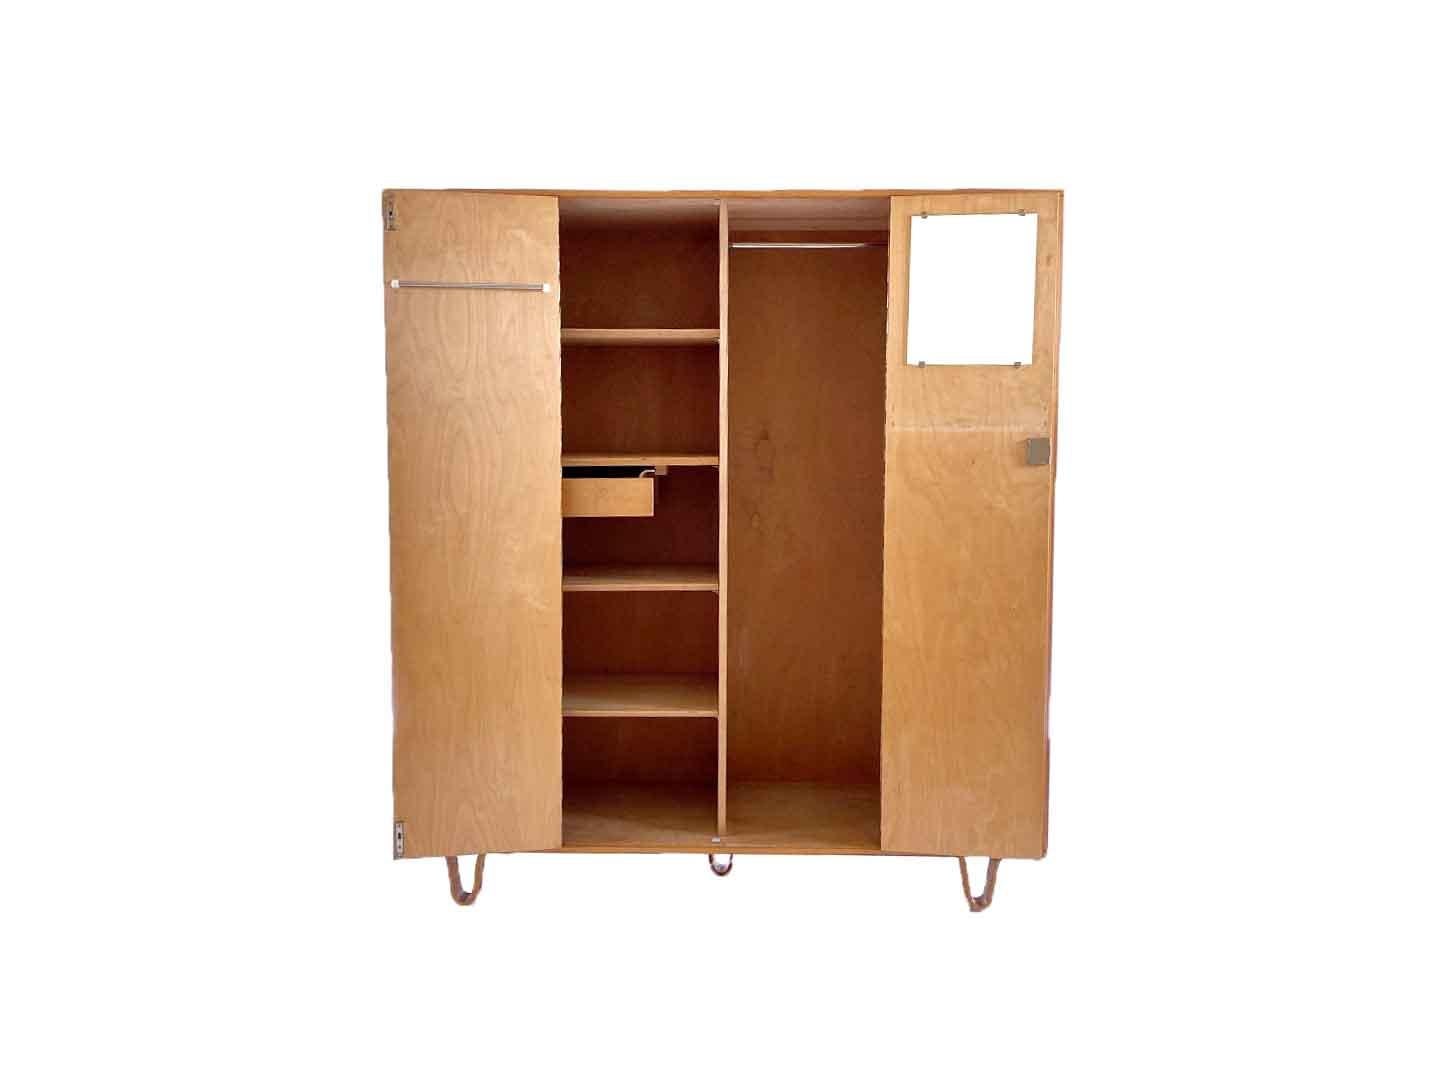 Very particularly iconic vintage kb04 wardrobe by Cees Braakman, produced by Pastoe in 1954. The wardrobe belongs to the Pastoe birch series and with its plywood loop legs, it is a real dutch design classic. The wardrobe has 4 doors with a hanging